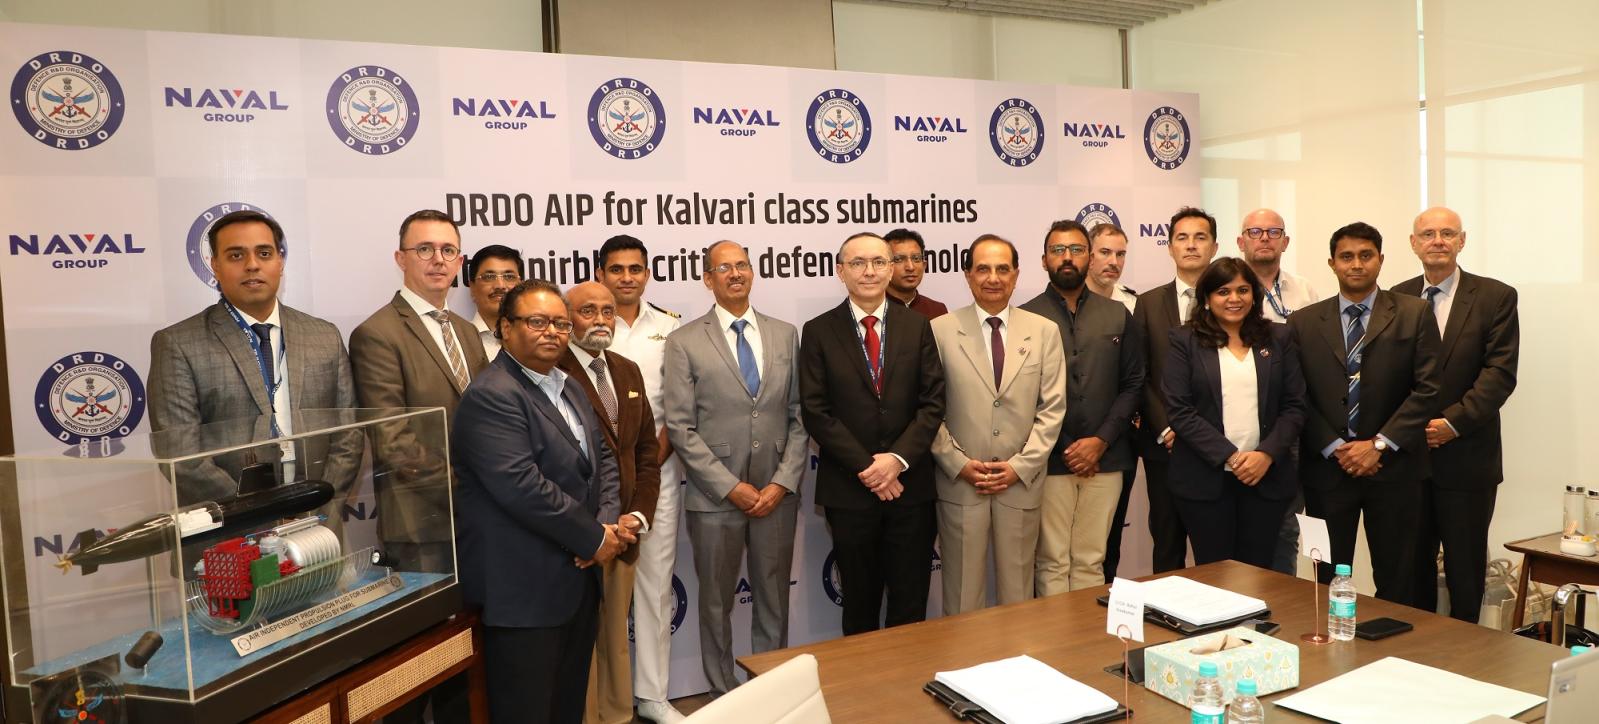 Naval Group cooperation agreement AIP